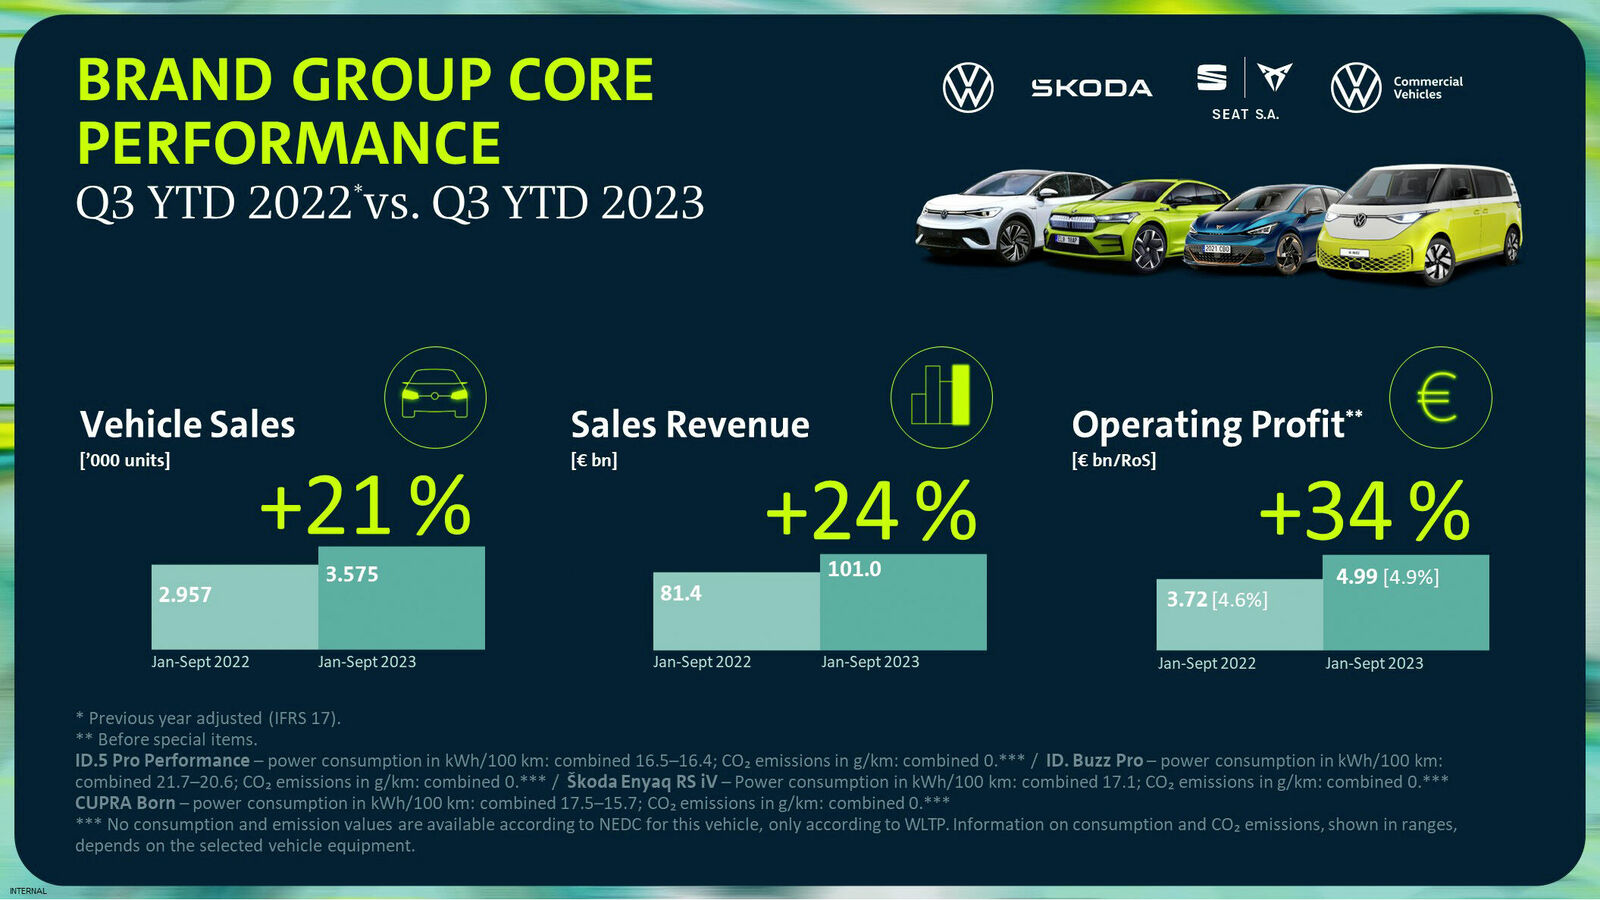 Brand Group Core performance